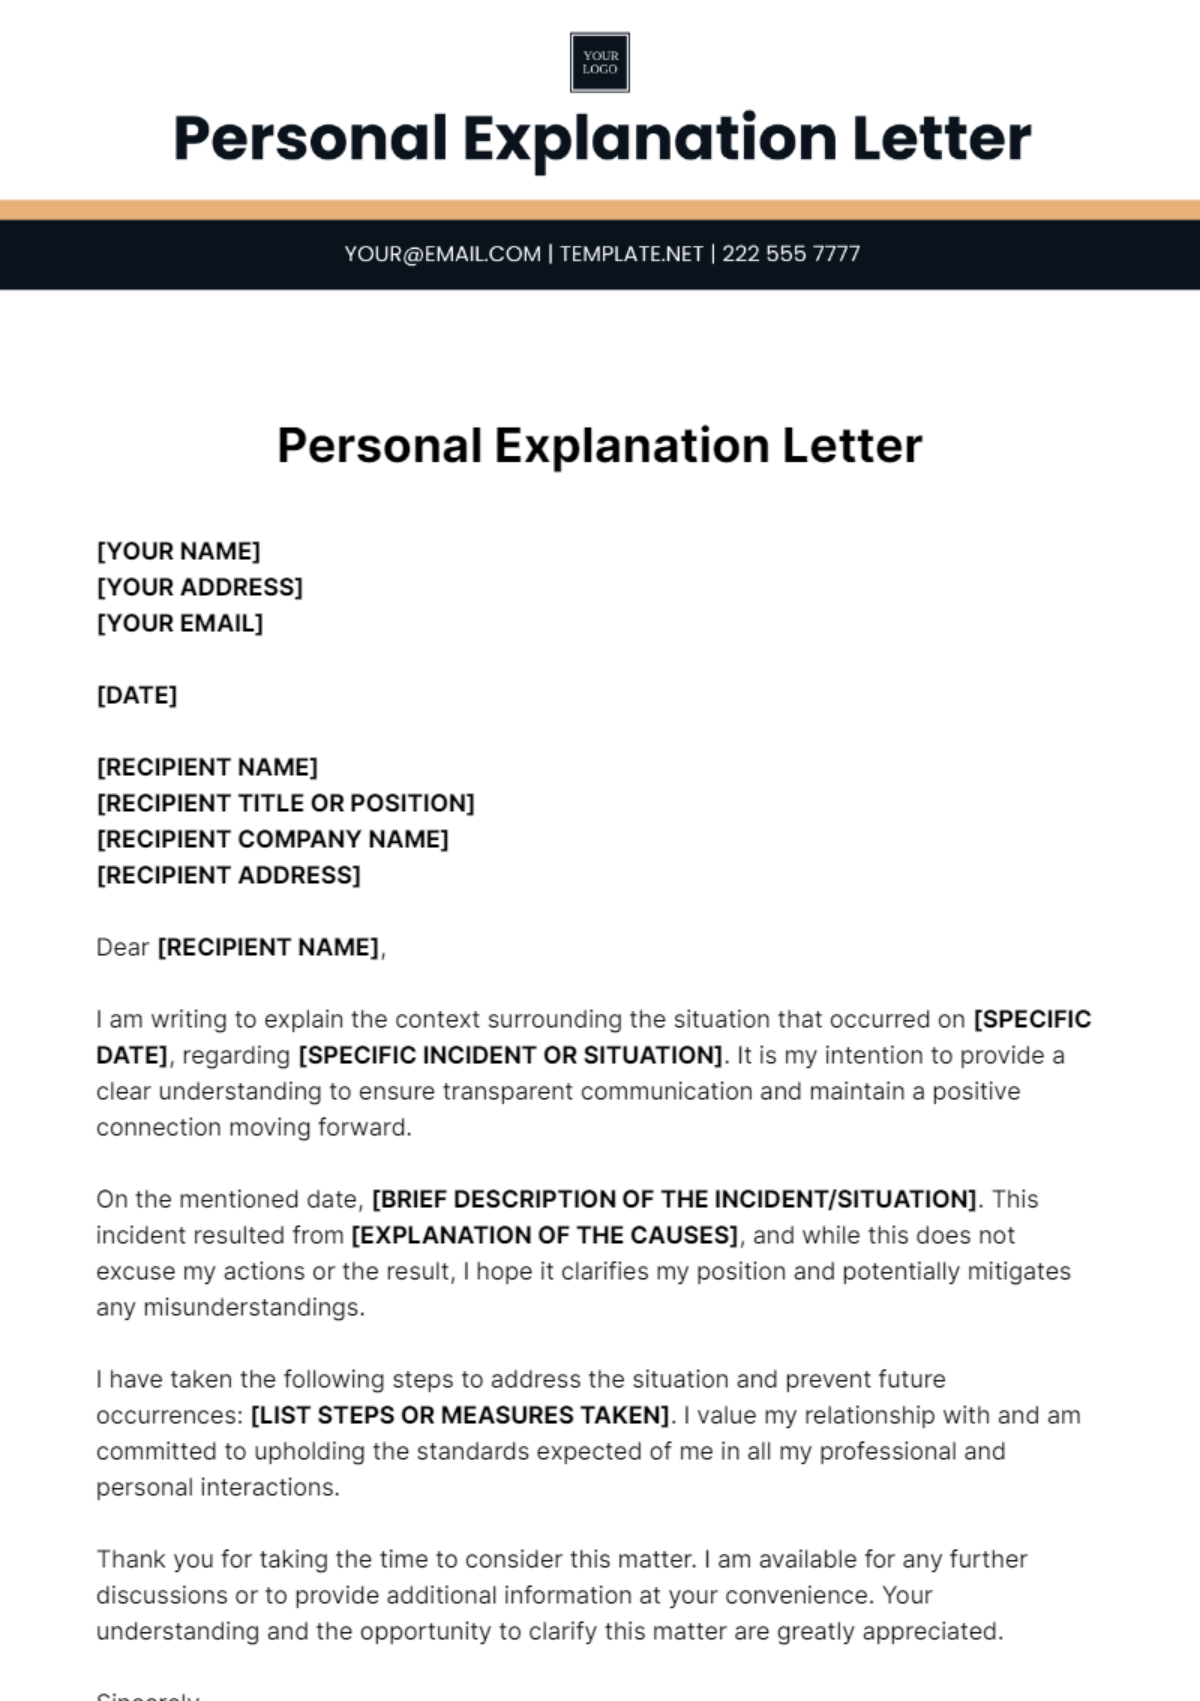 Personal Explanation Letter Template